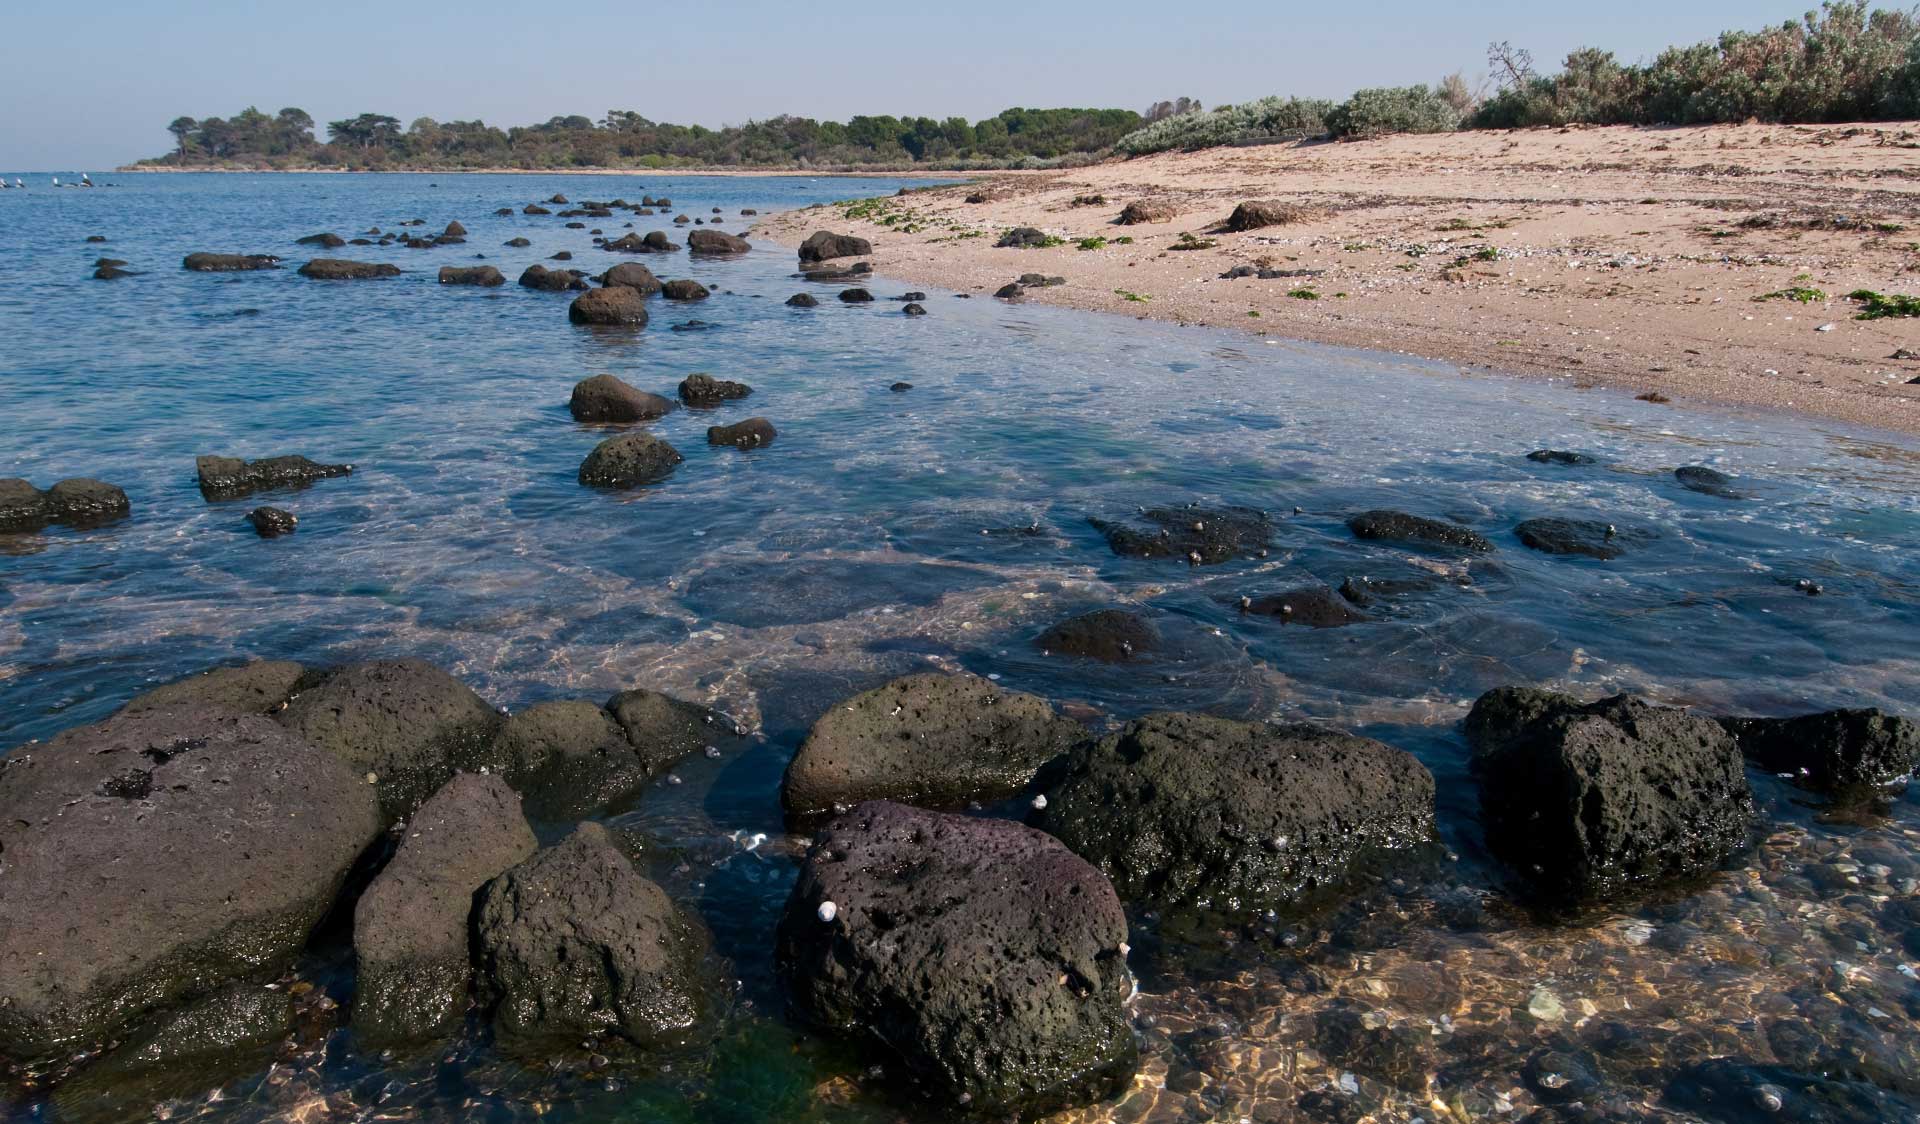 The water's edge at Point Cook Marine Sanctuary